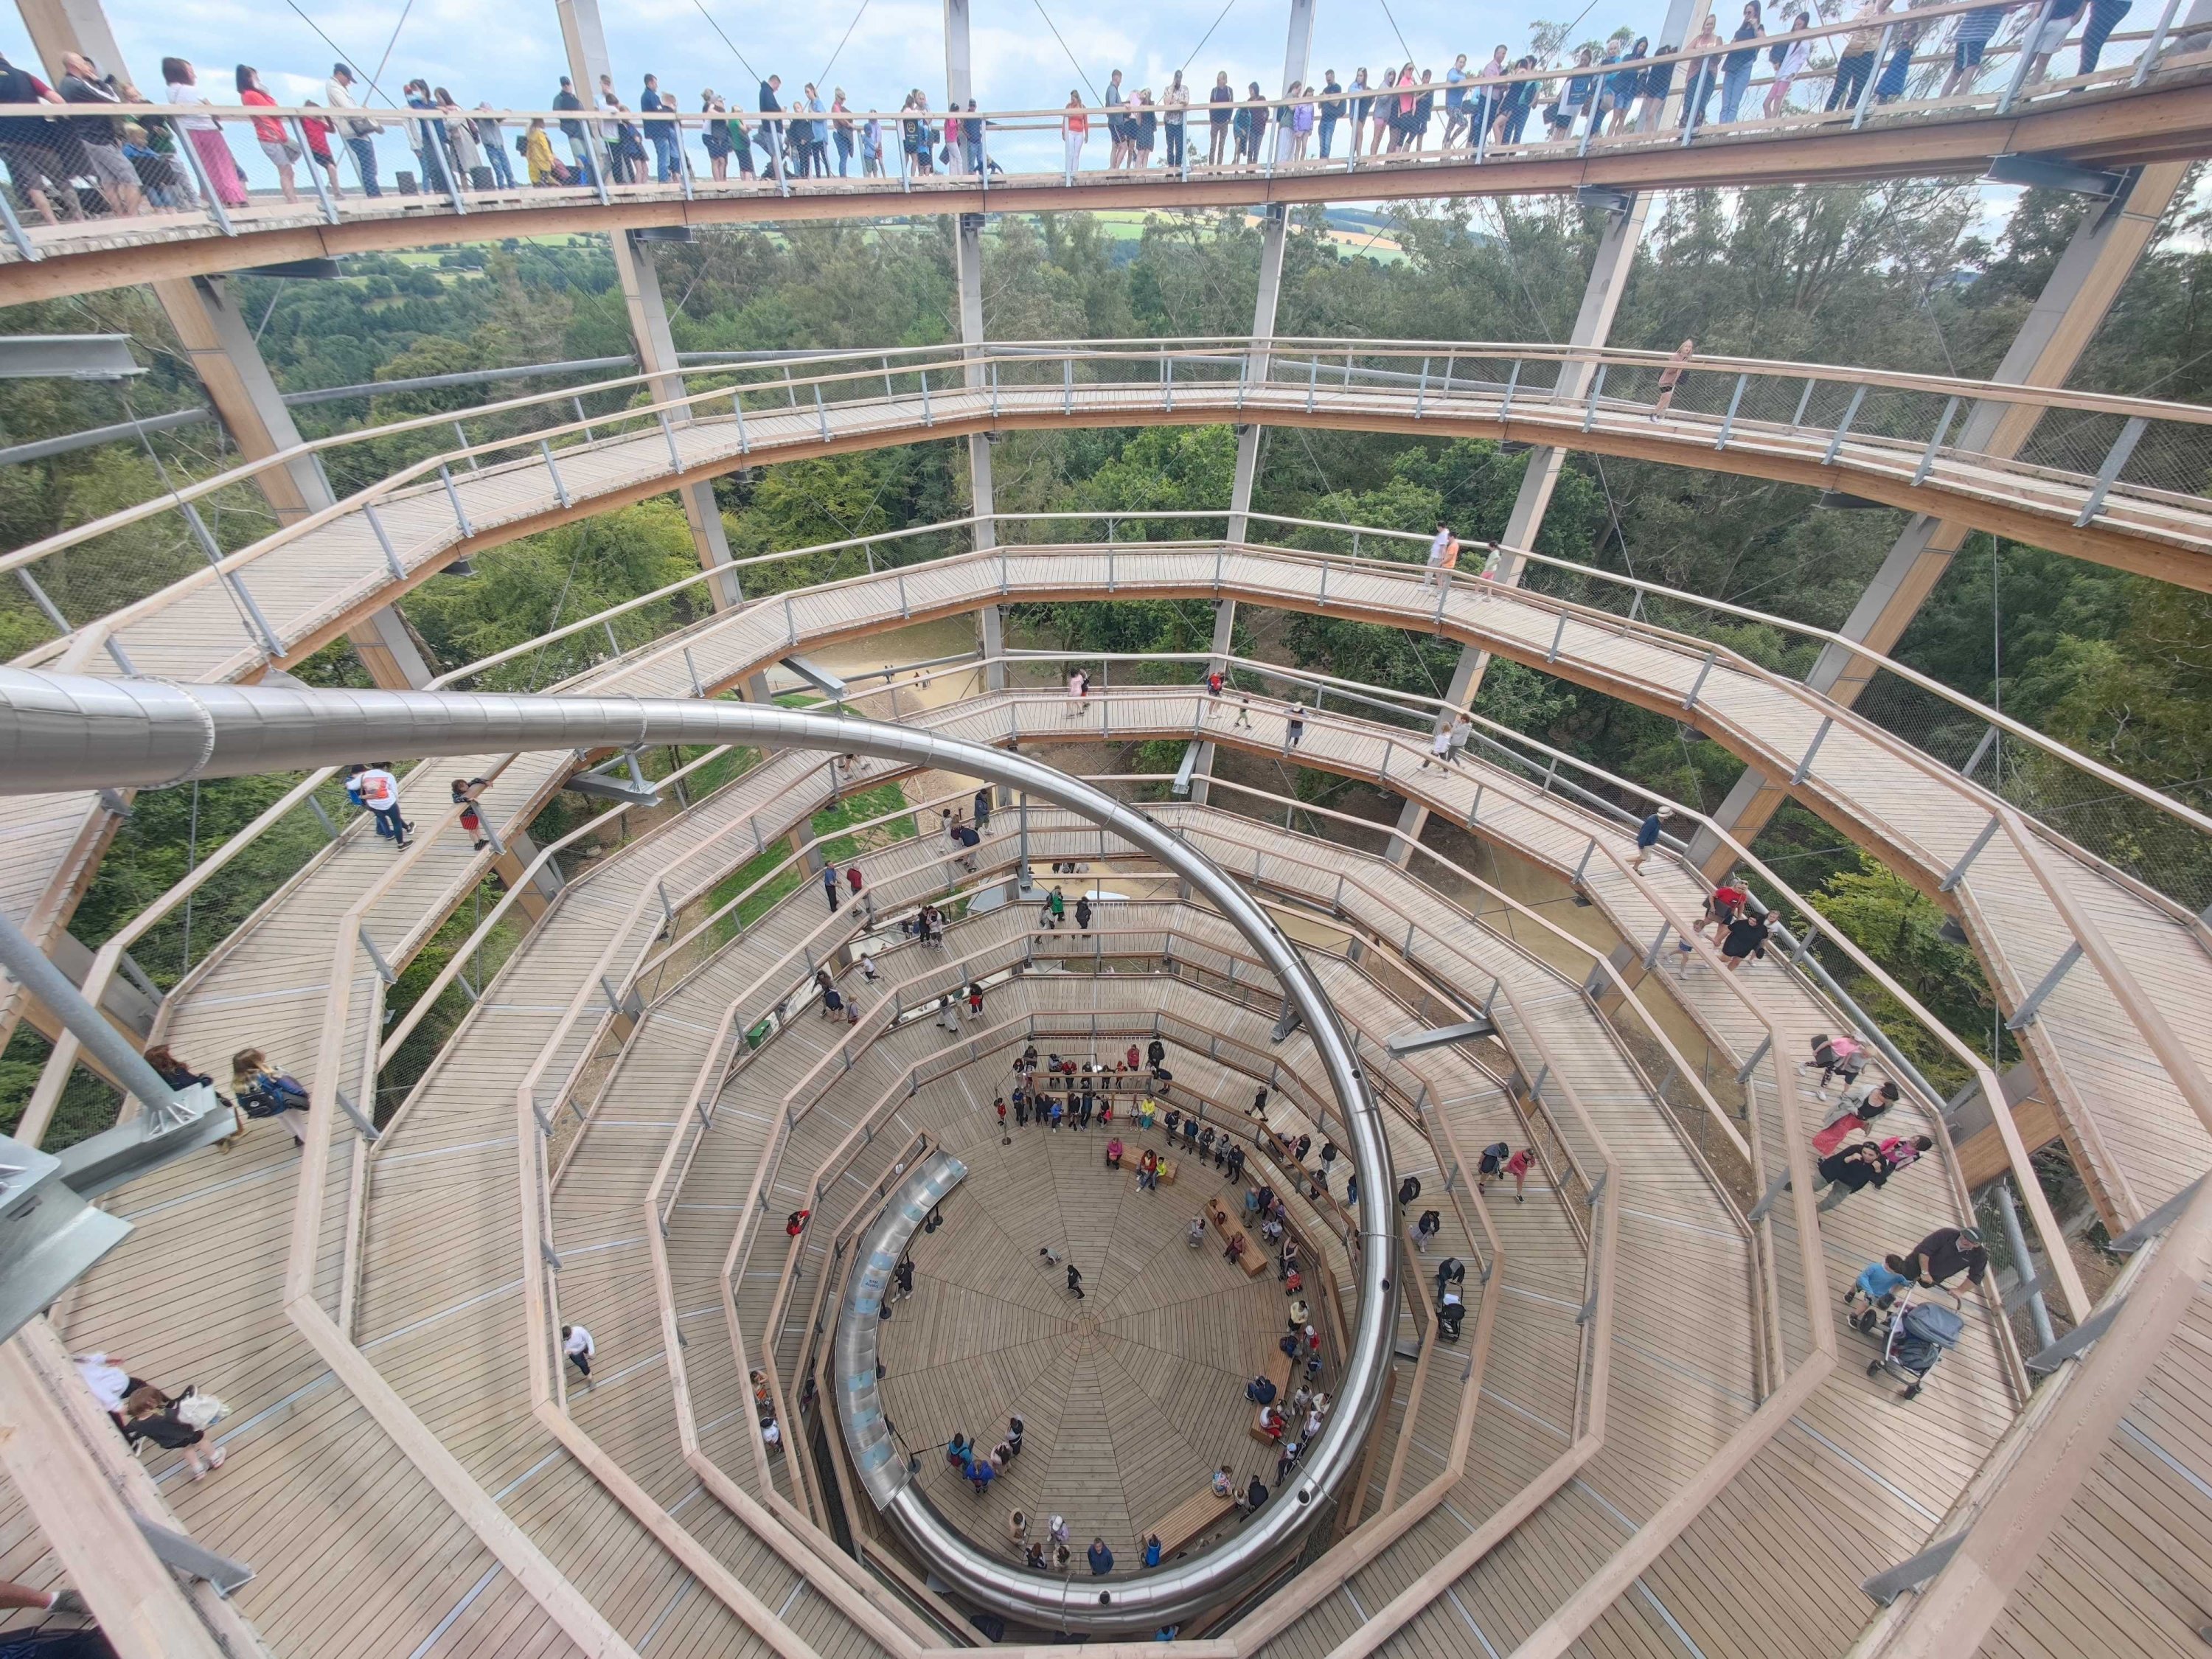 The highlight of the treetop walk is the panorama tower at the end: Visitors walk up a large spiral structure before sliding back down through a long tunnel slide, Dublin, Ireland, July 30, 2022. (dpa Photo)